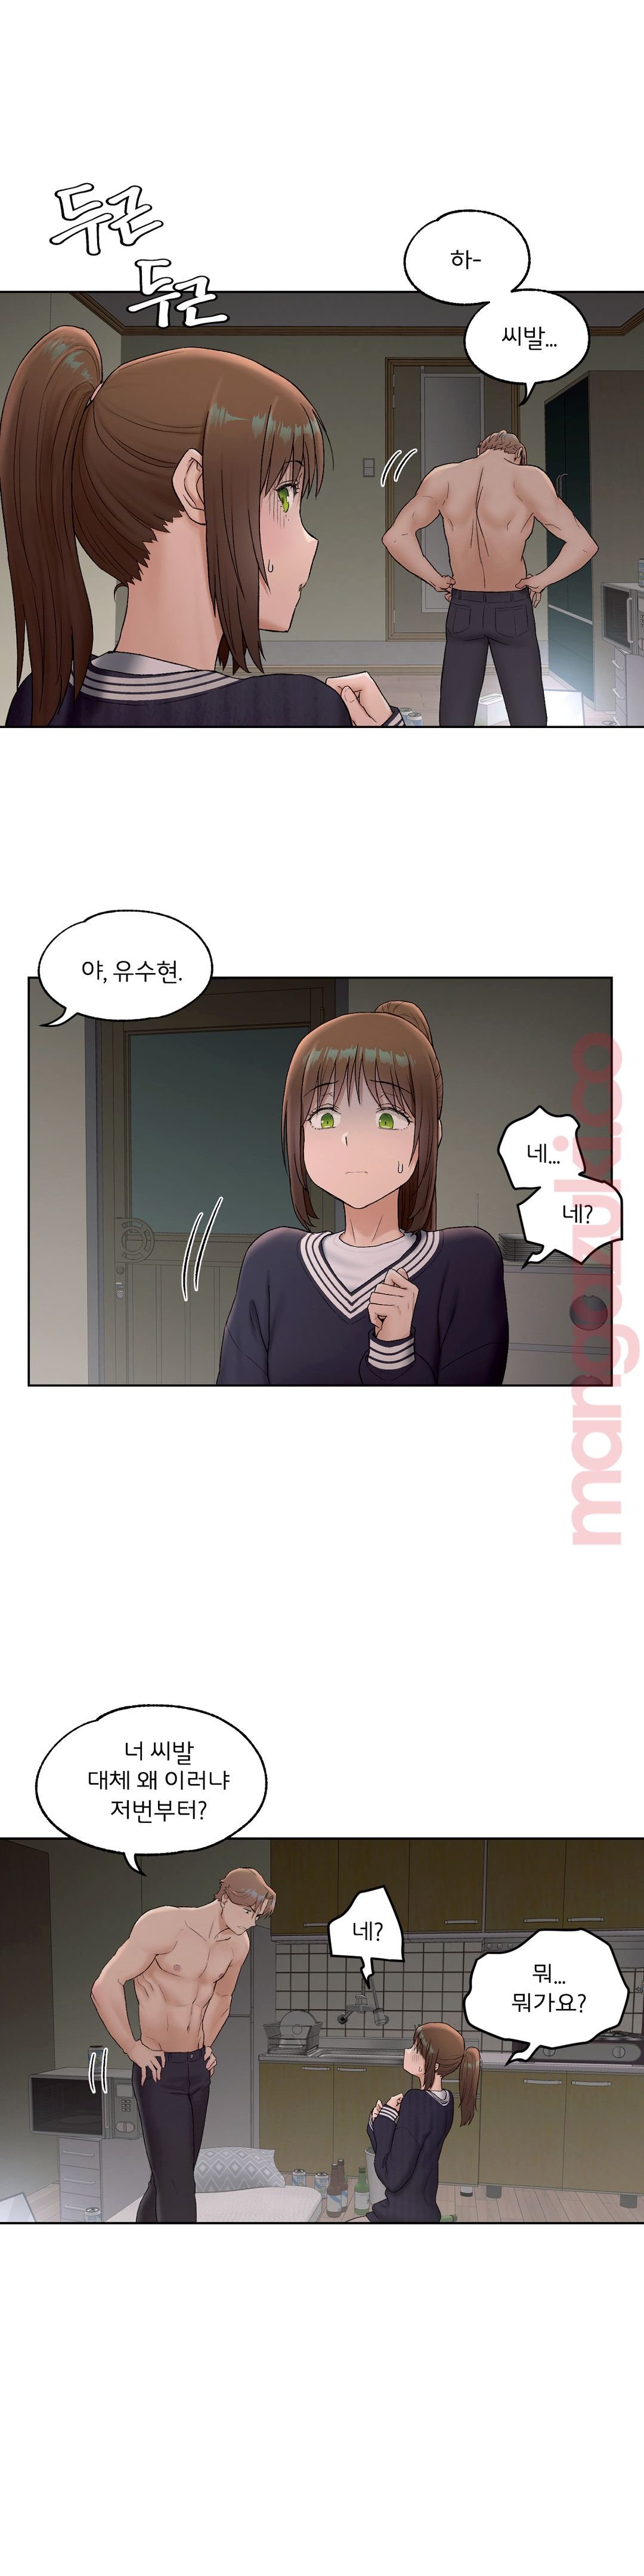 Sexercise Raw - Chapter 50 Page 2